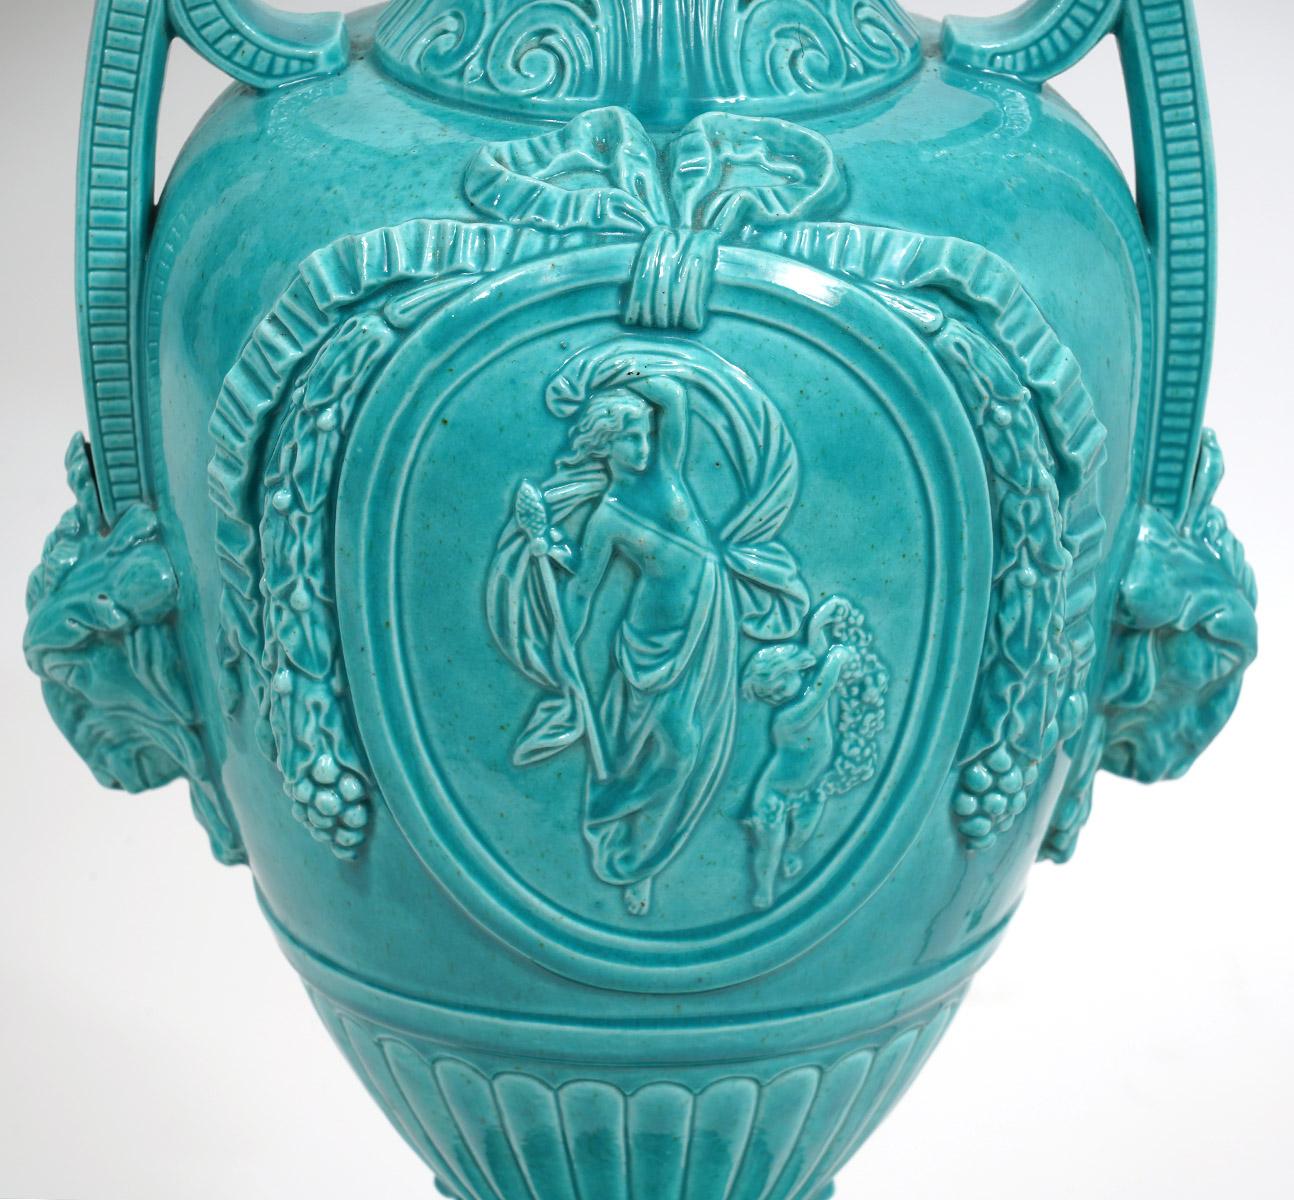 The beautiful Turquoise glaze and the Classical Greek form make these table lamps stand out. They are decorated in high relief with figures, ribbons, rams heads and leaf work standing on circular marble bases. Likely late 19th century.